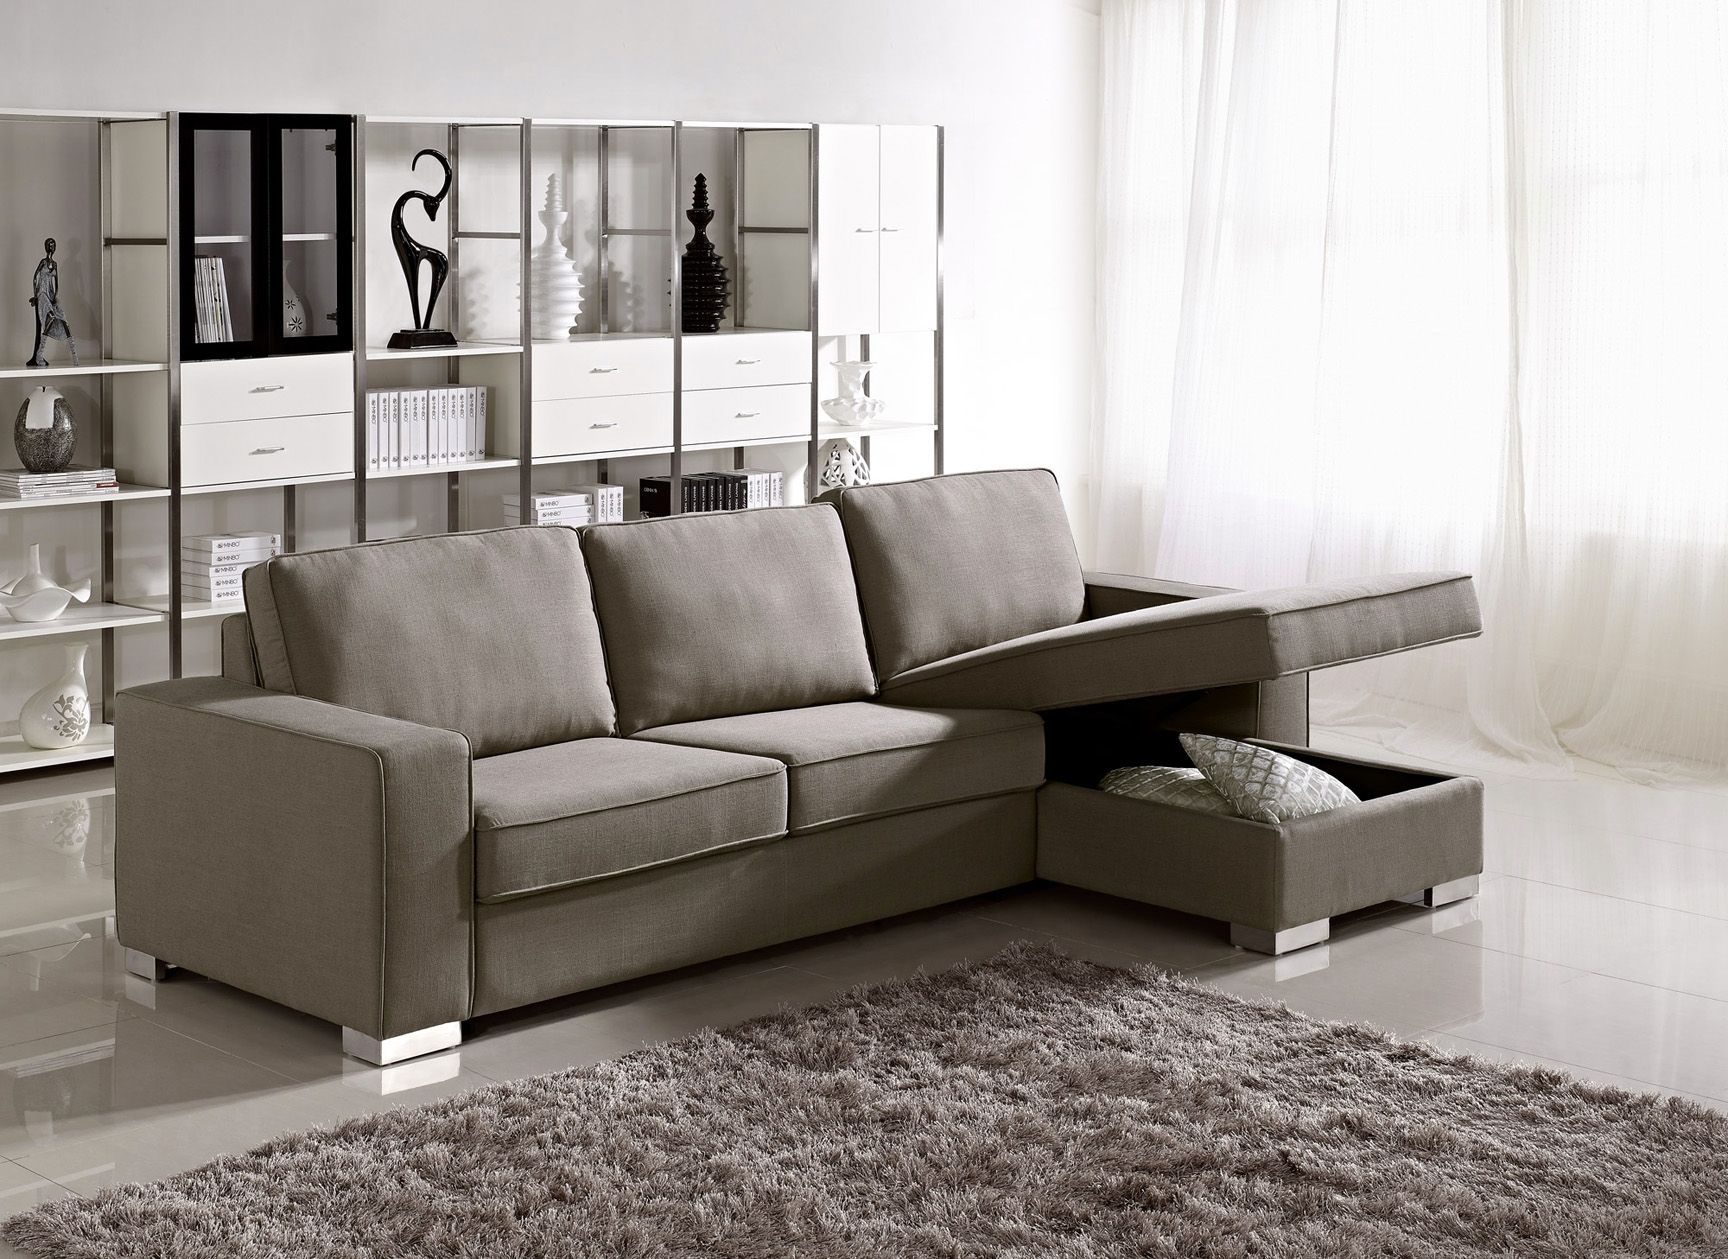 Great Apartment Sectional Sofa 27 Living Room Sofa Ideas With Pertaining To Apartment Sofa Sectional (View 2 of 12)